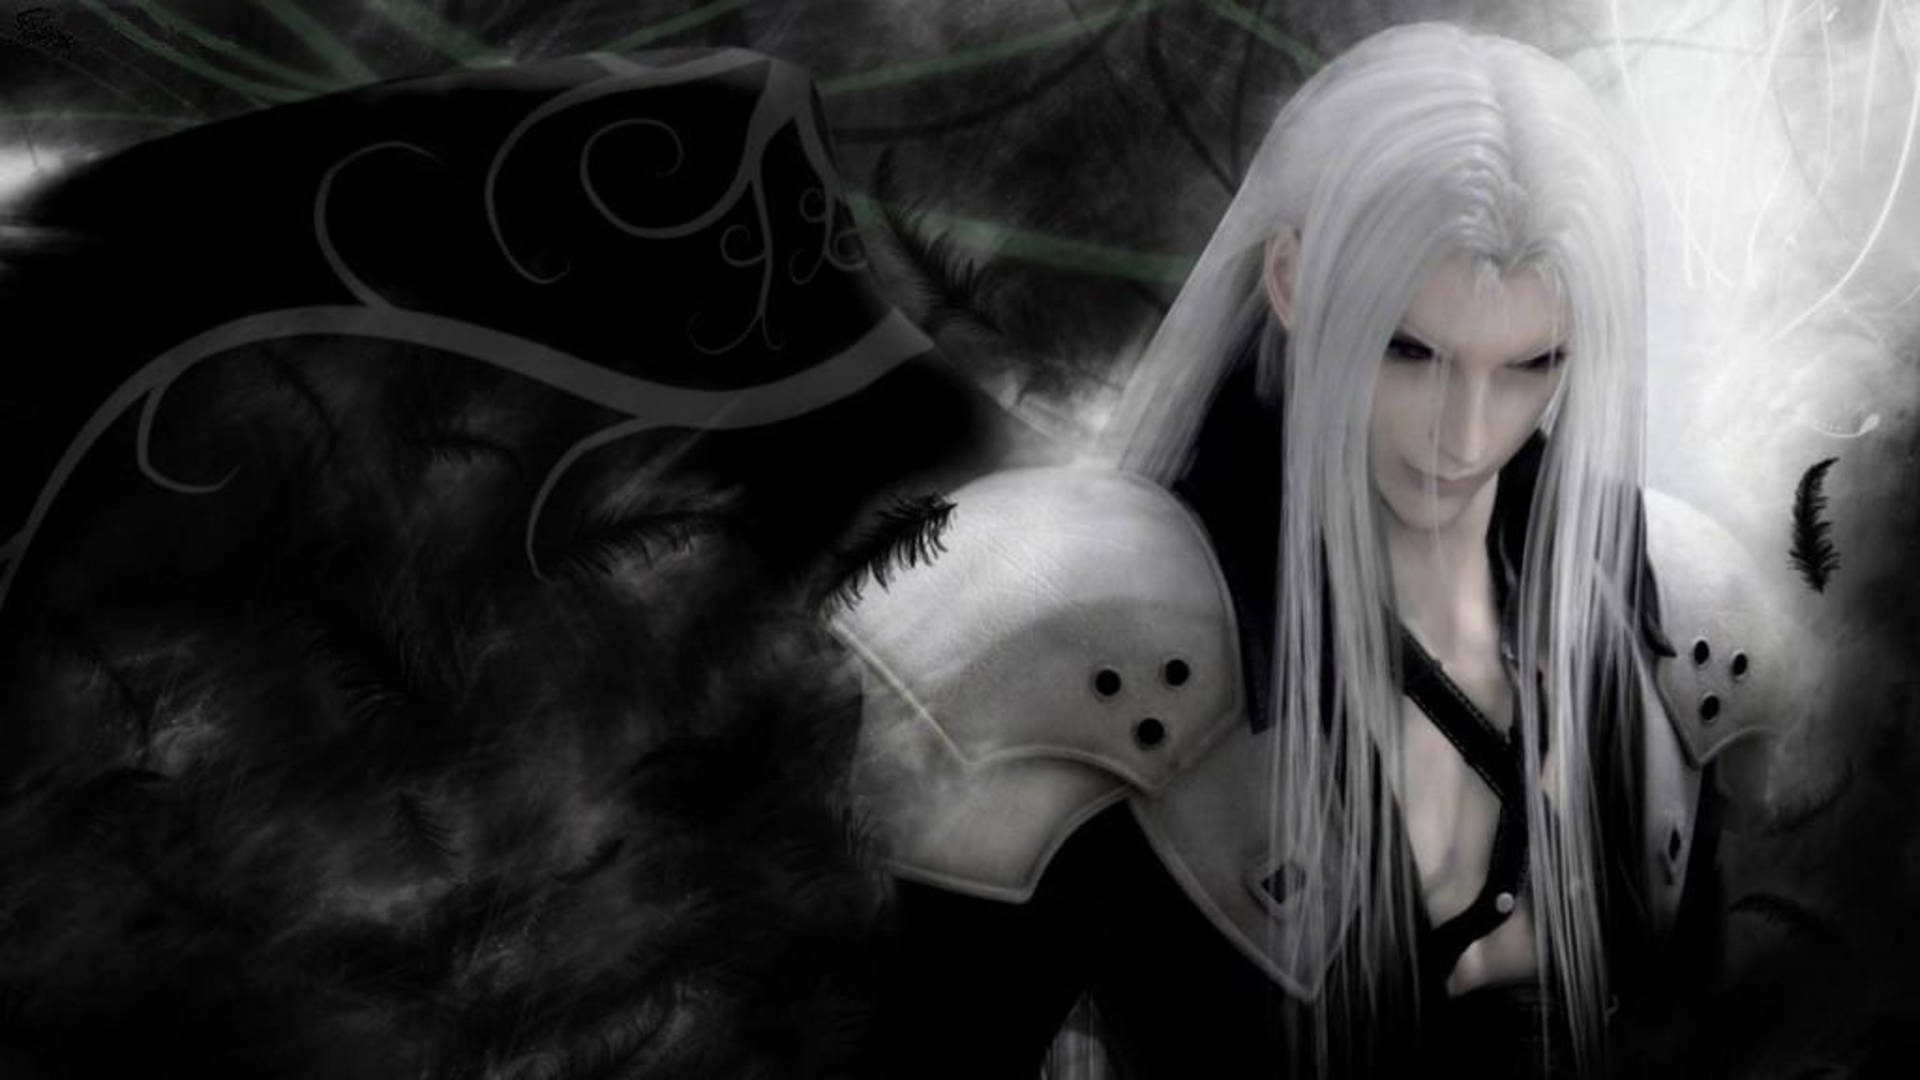 Sephiroth Pitch Black Eye And Wings Wallpaper